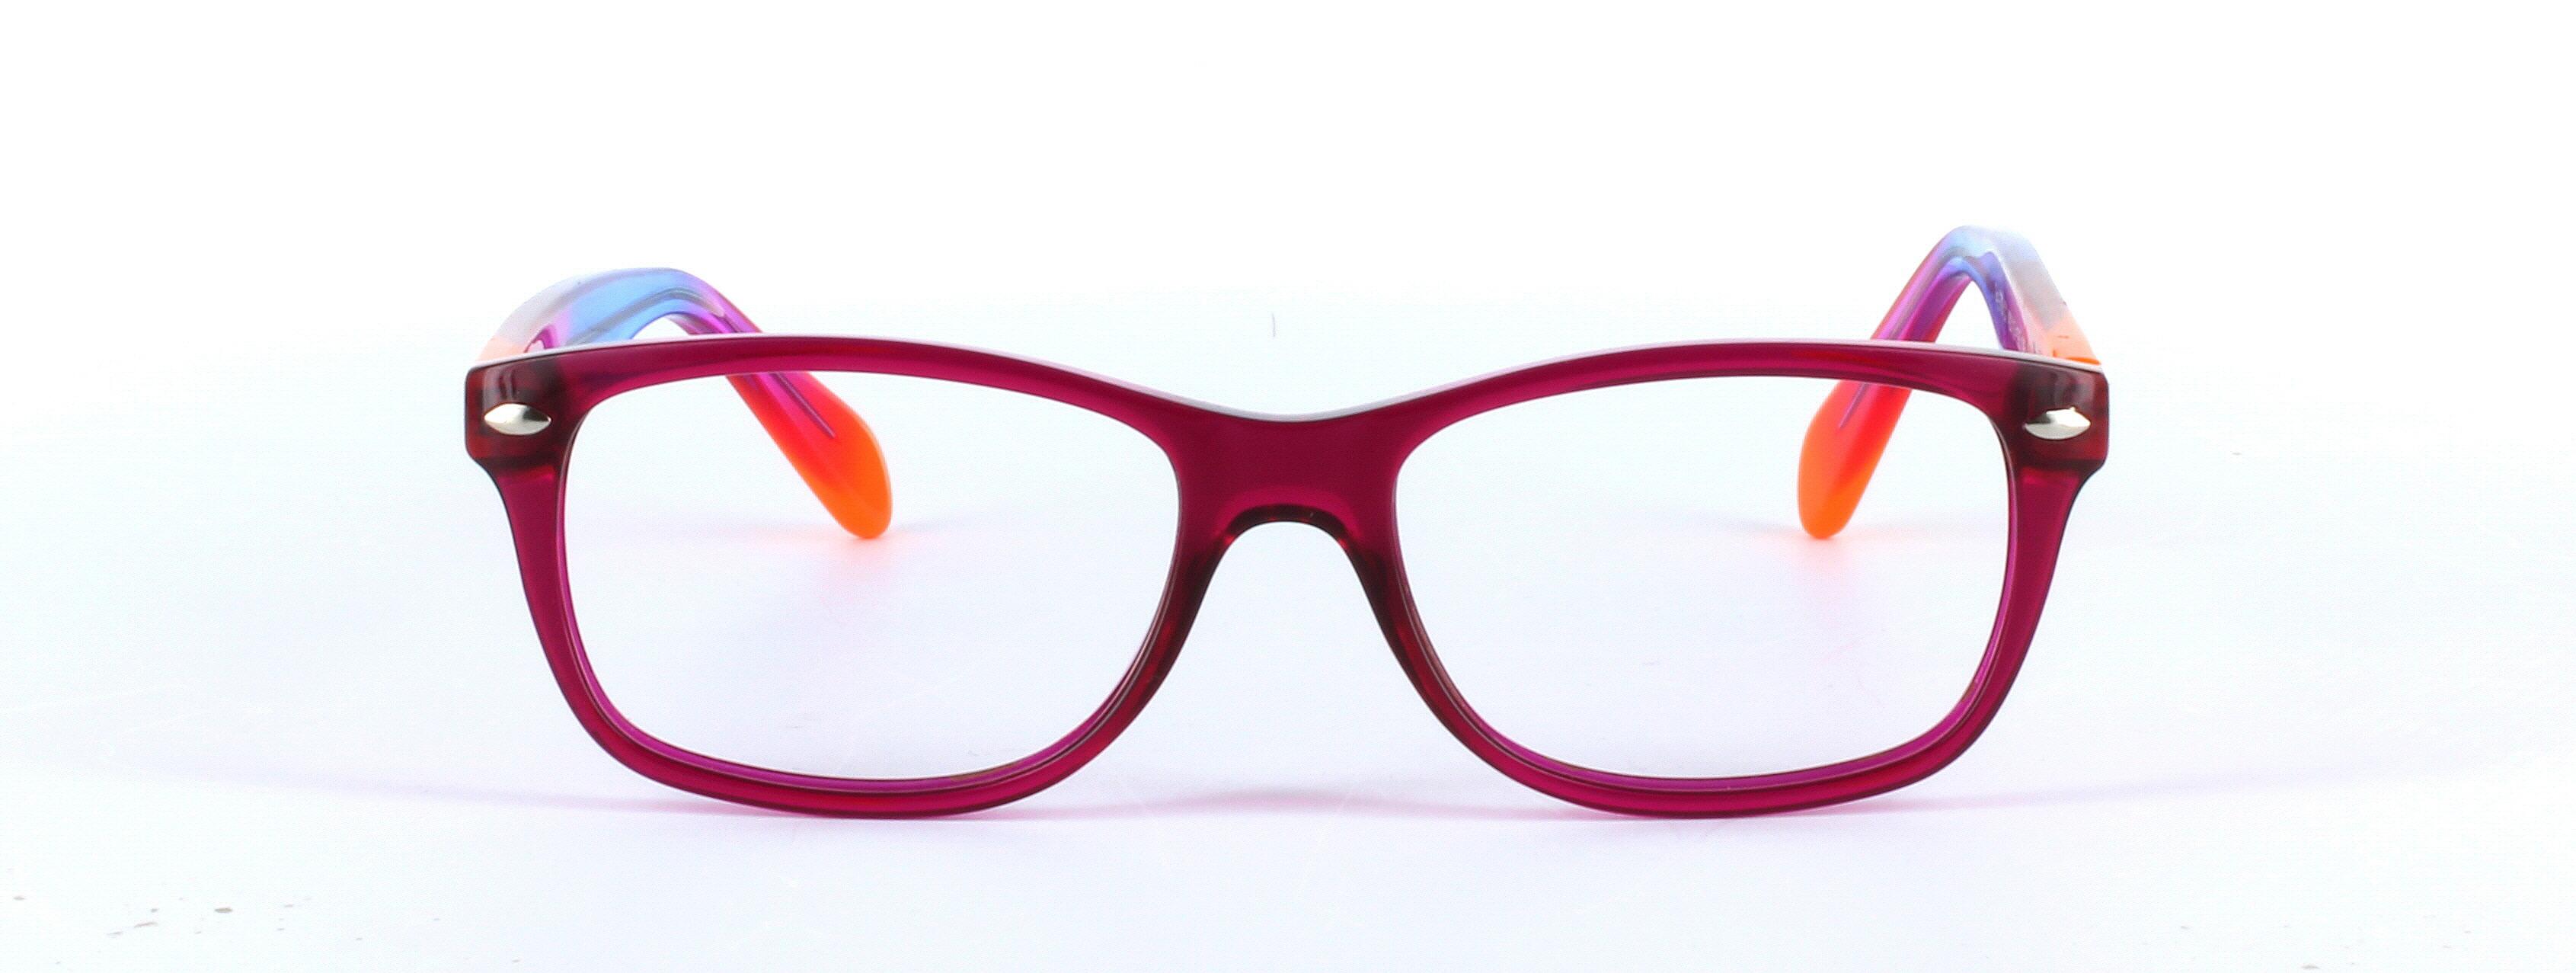 Liguria - Burgundy - Beautiful brightly coloured plastic frame for women - image view 2